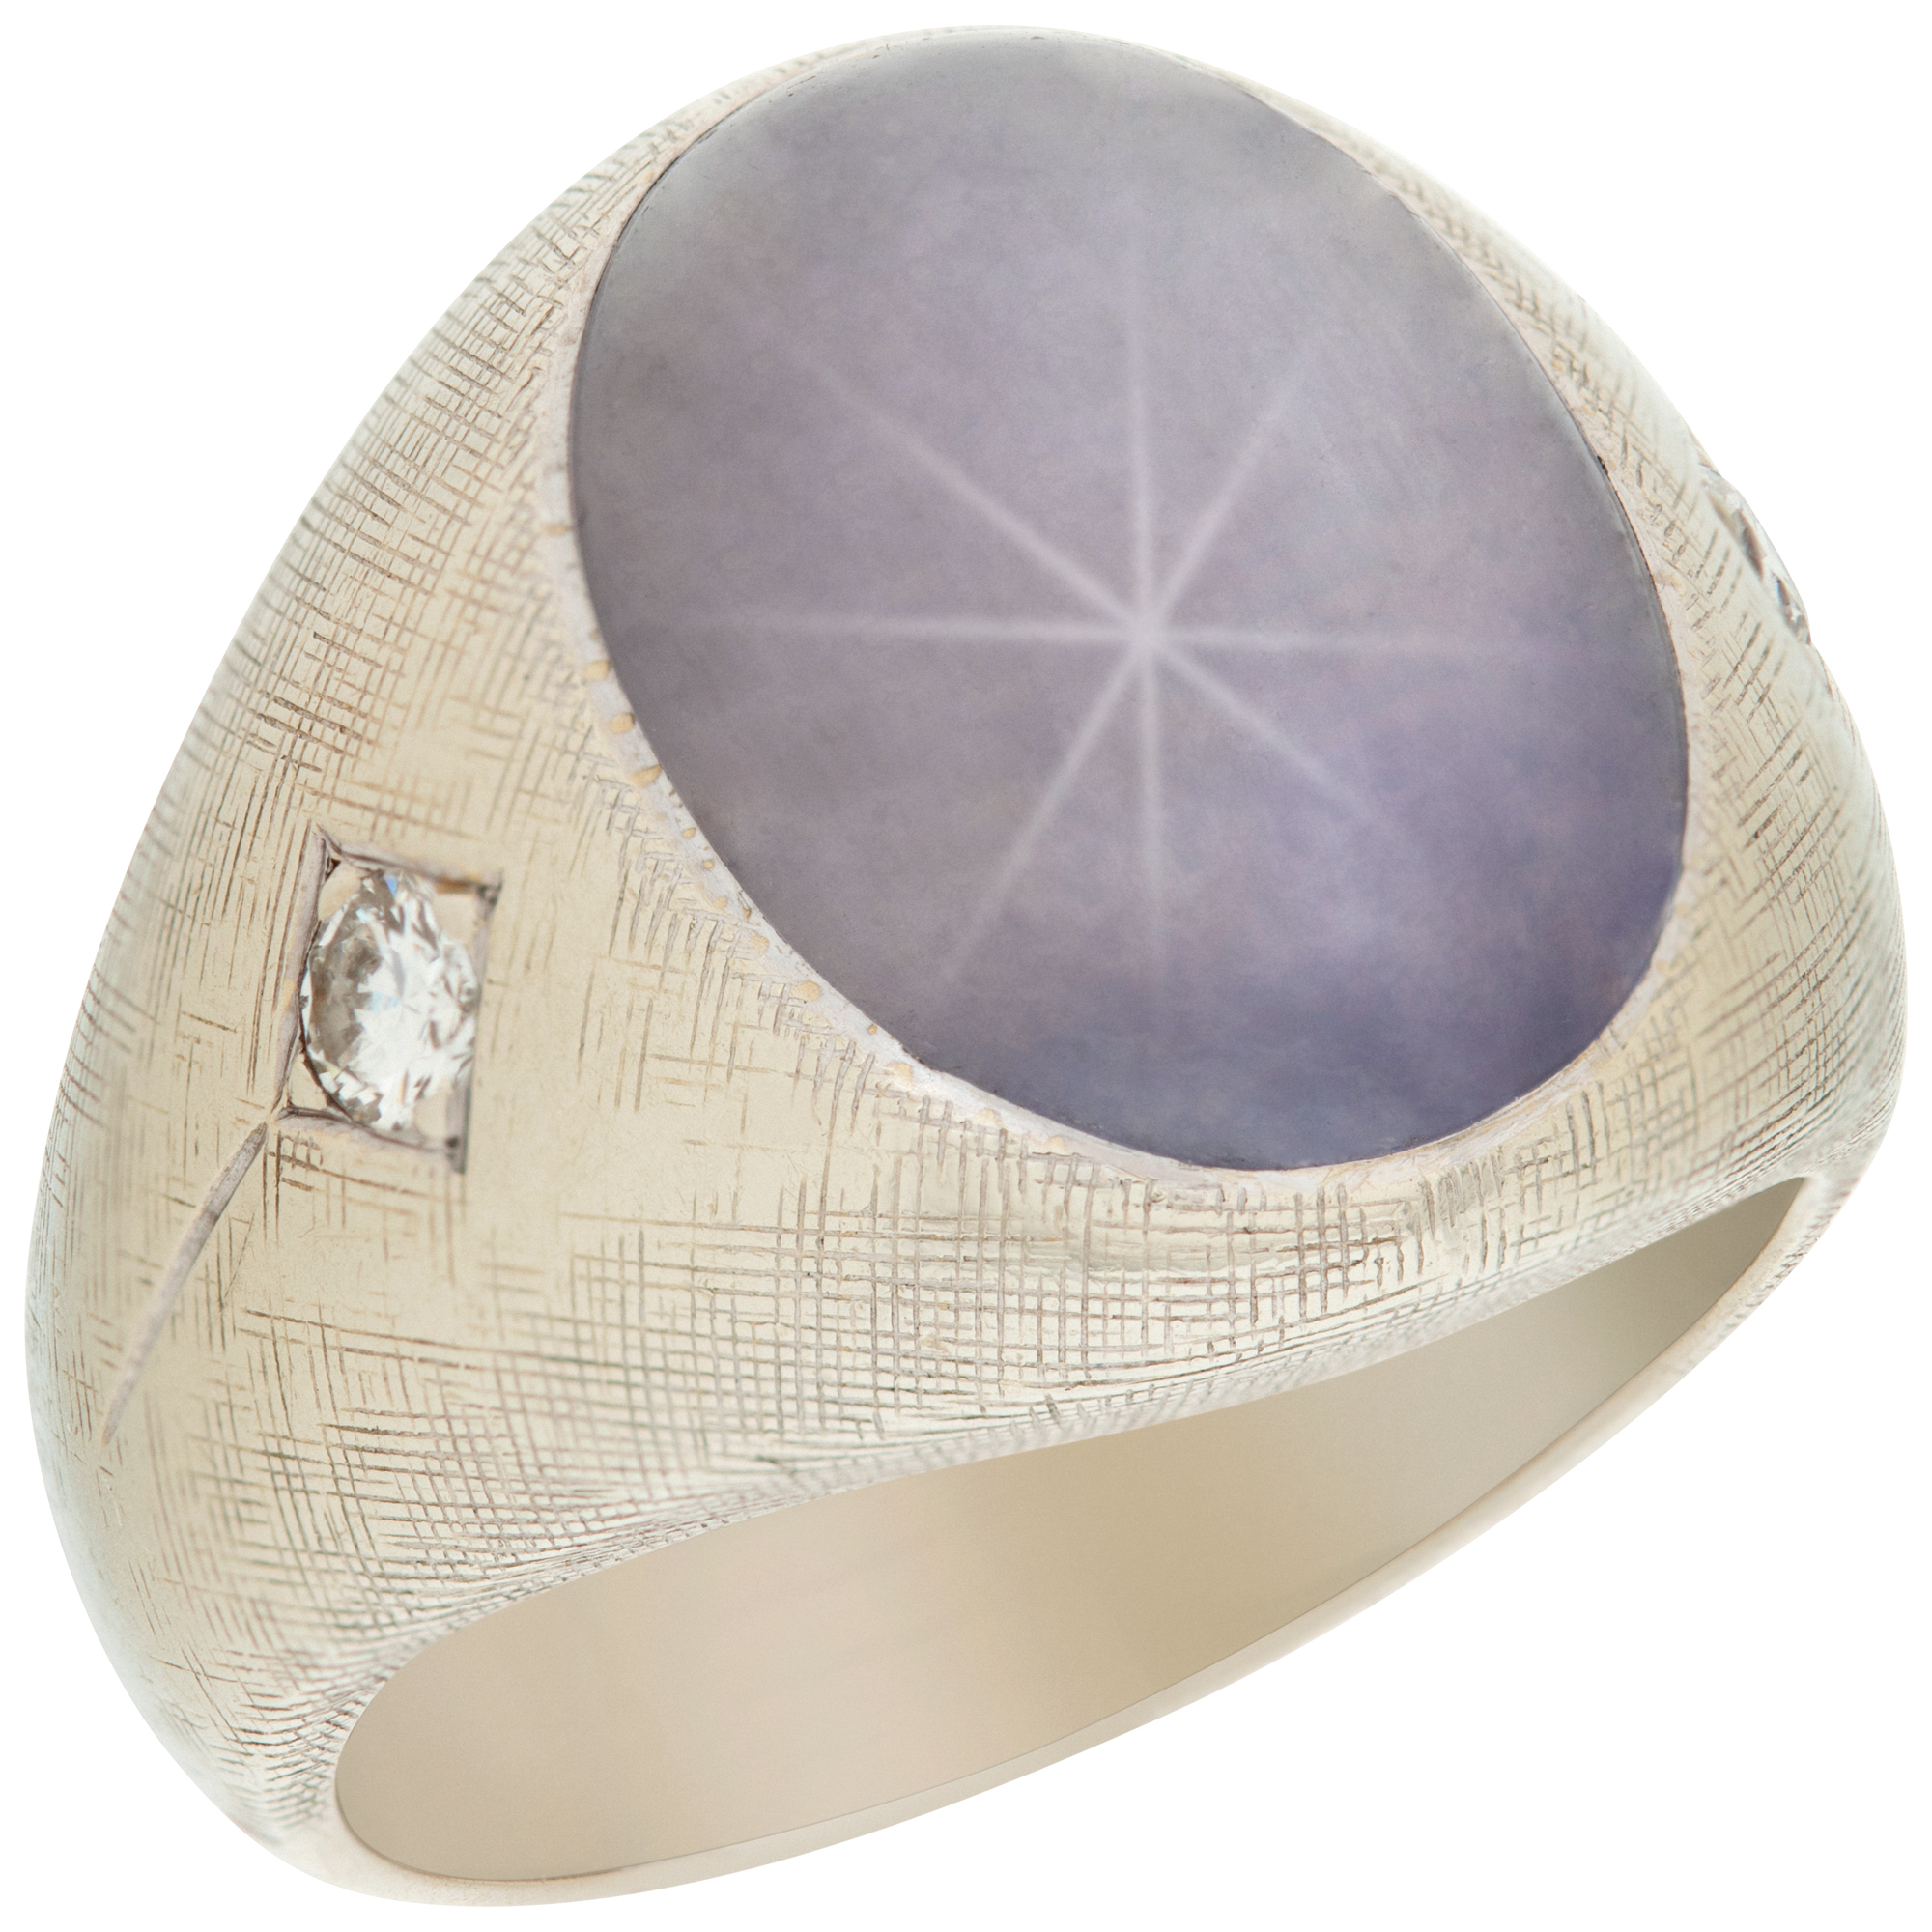 Star sapphire 14k white gold ring with 2 diamond accents. size 6 image 3